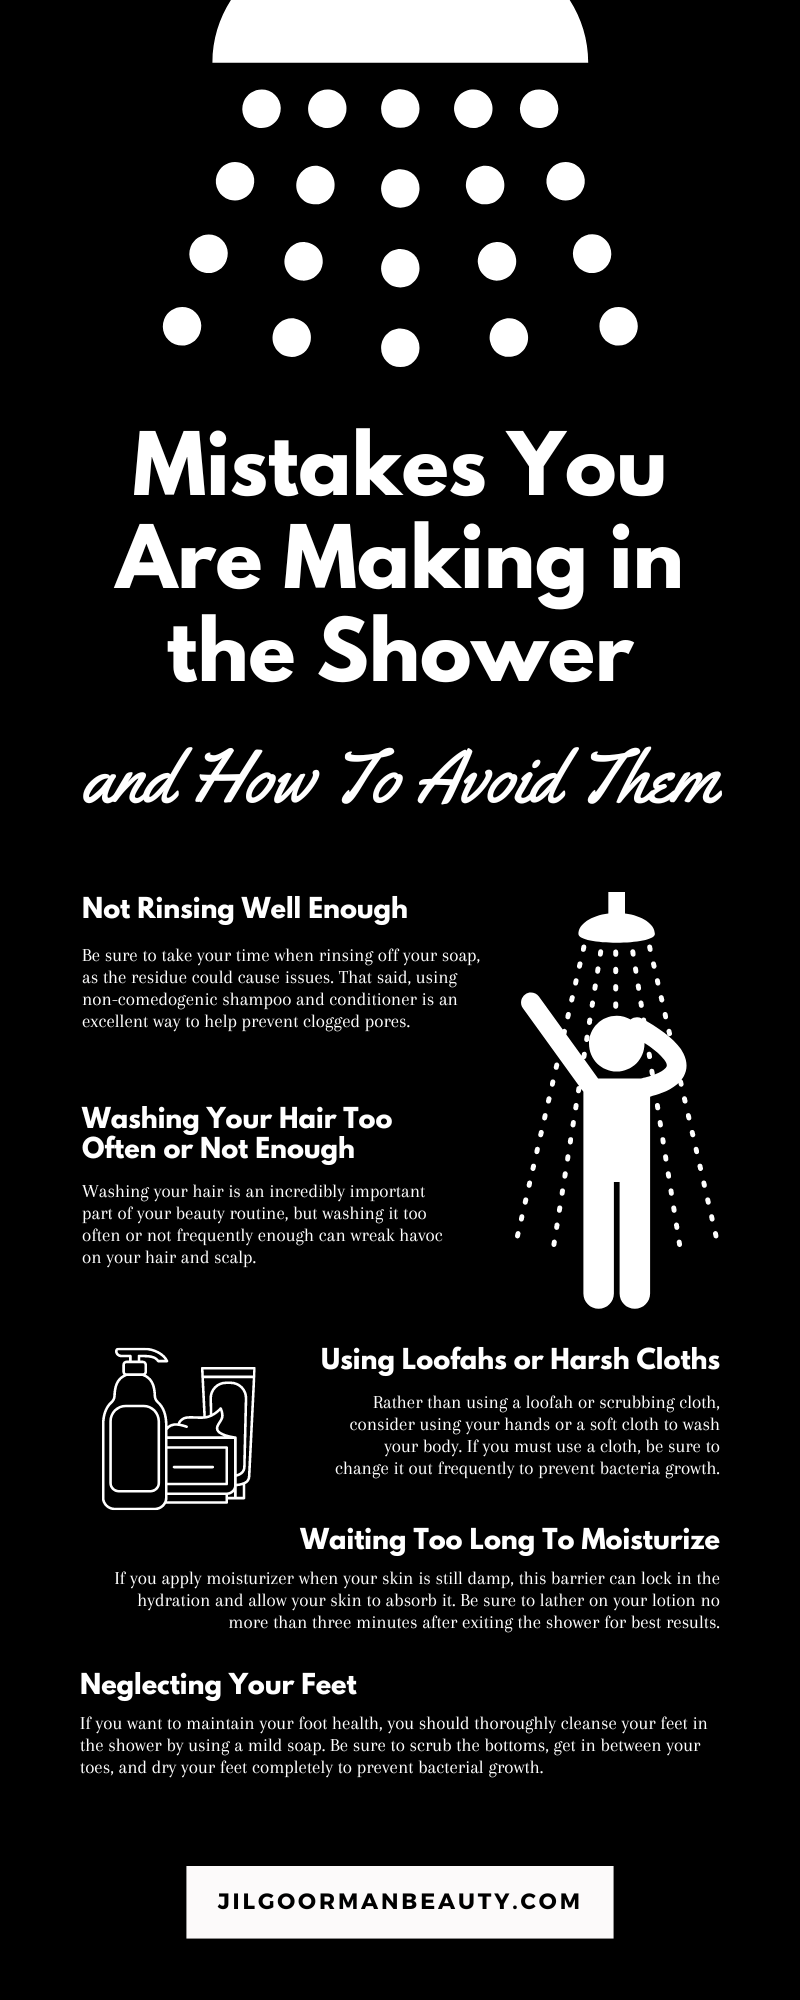 Mistakes You Are Making in the Shower and How To Avoid Them